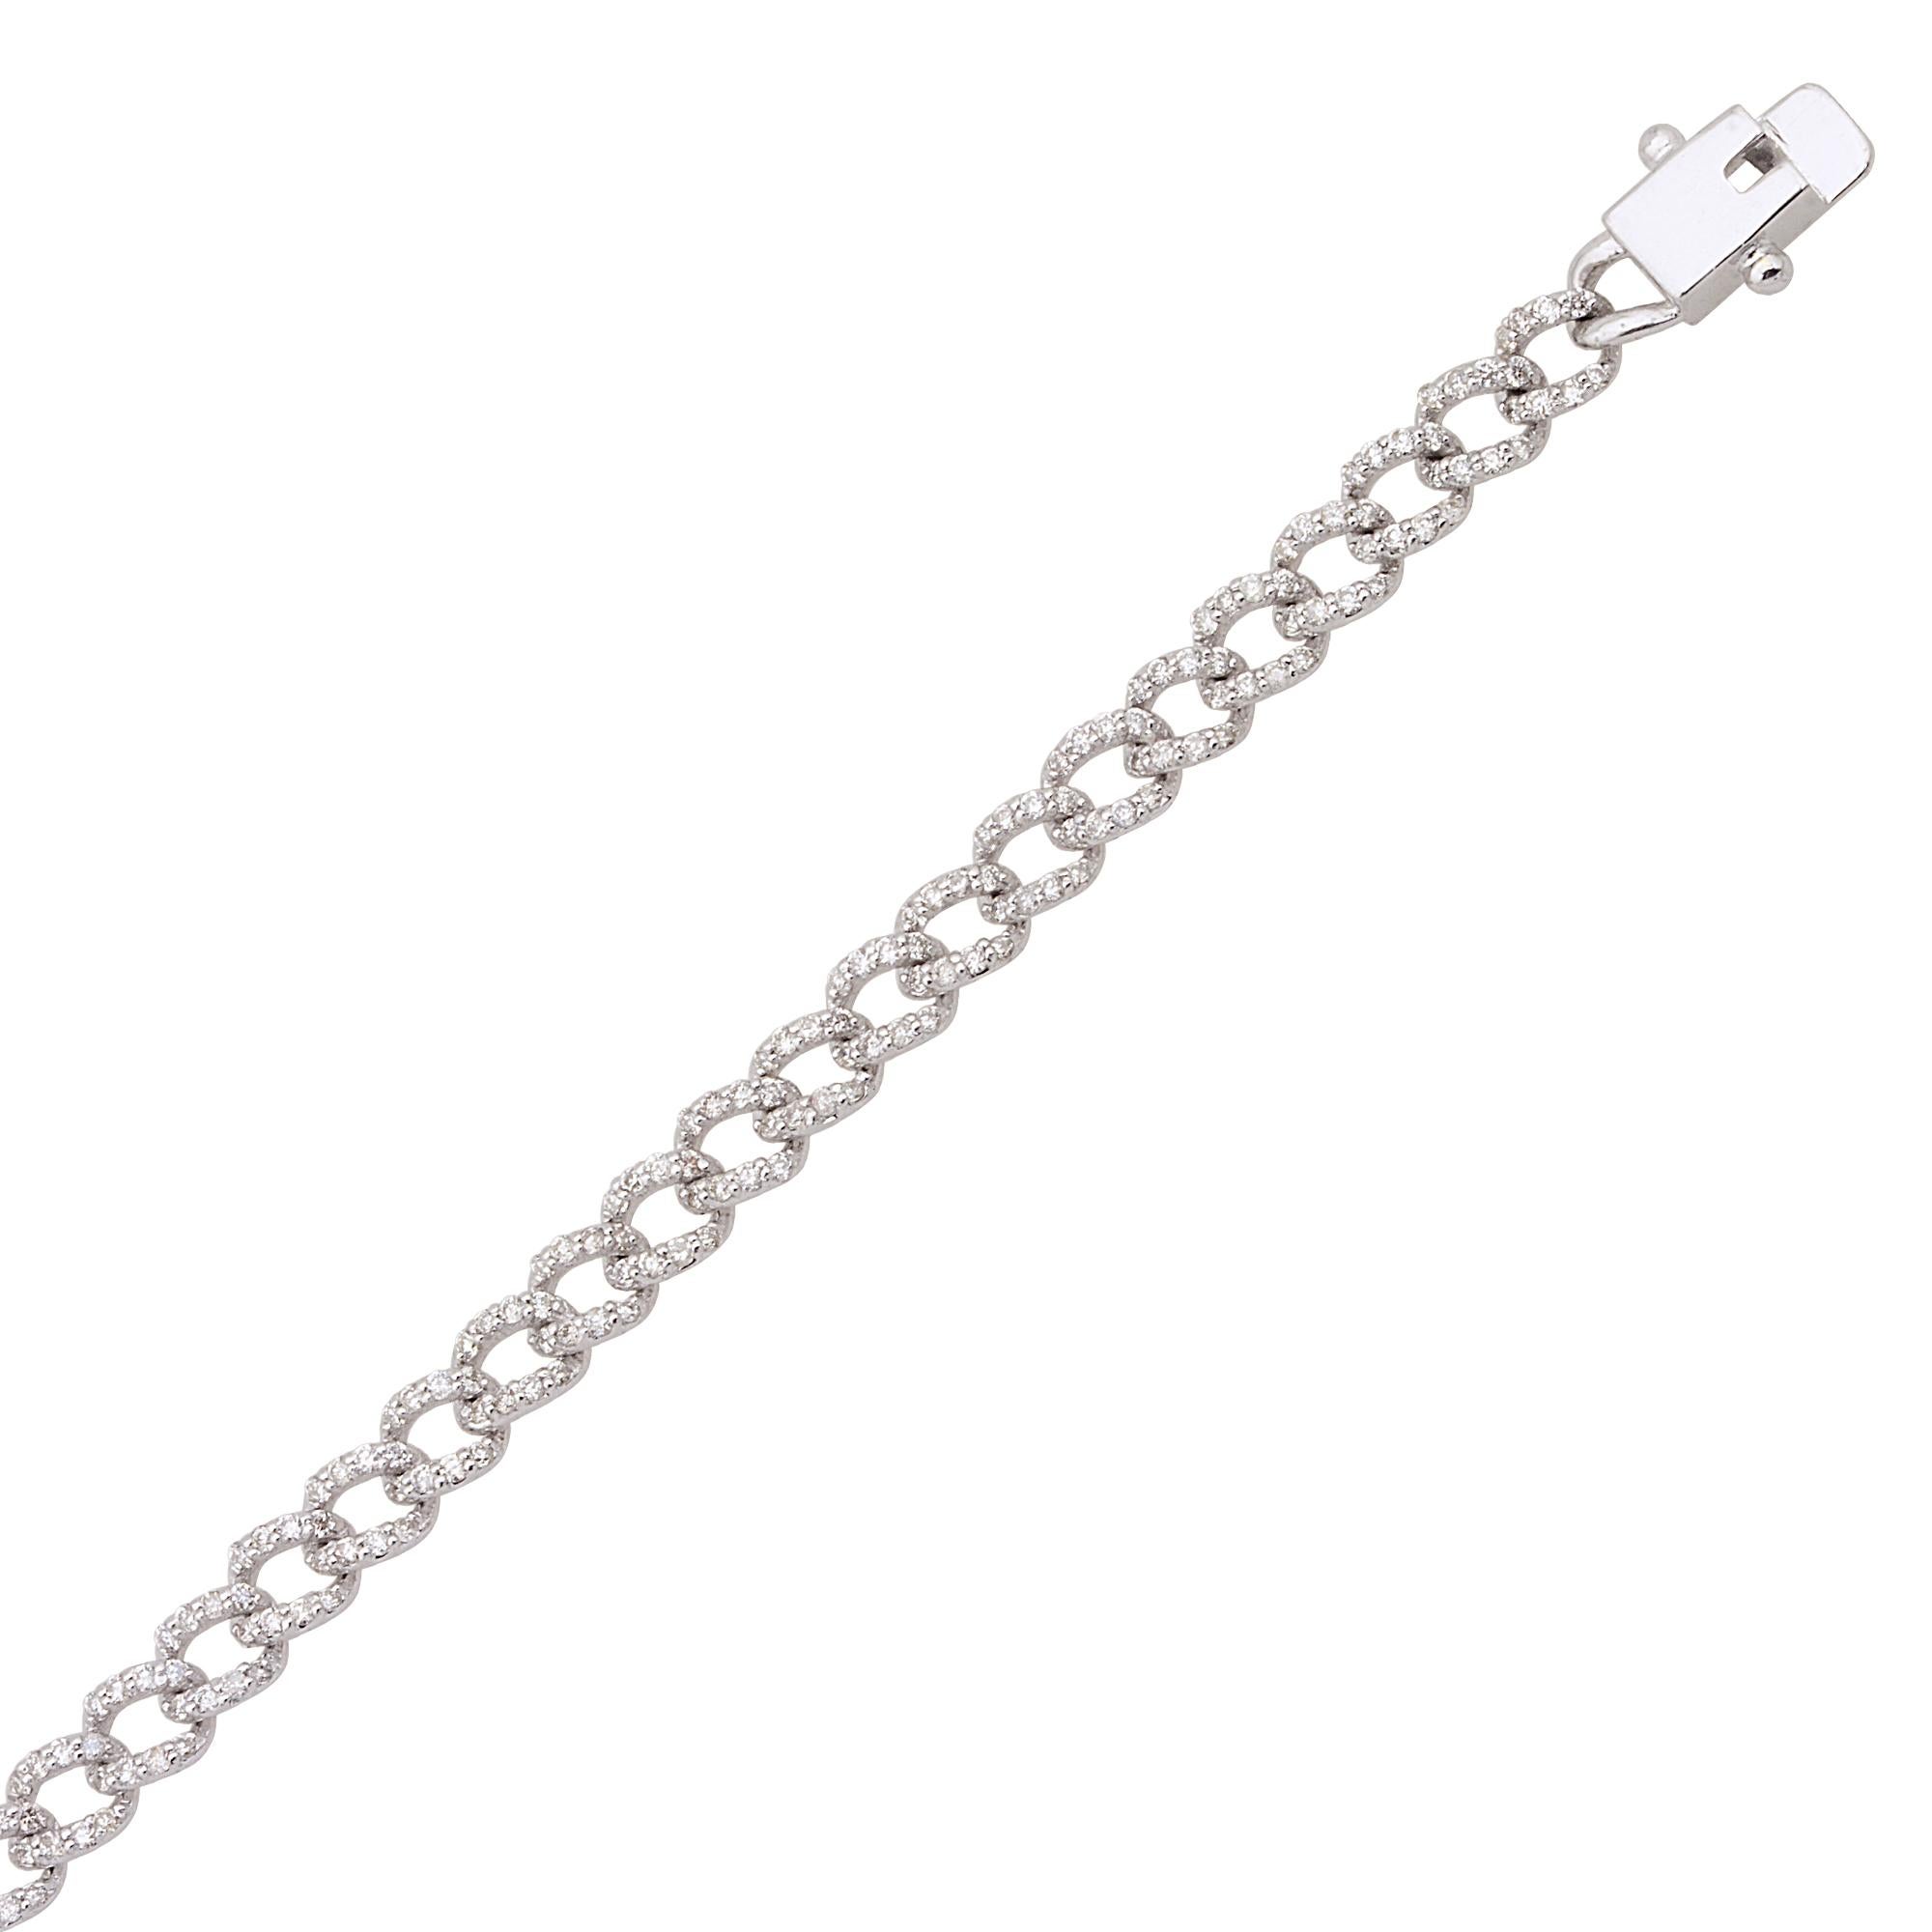 Item Code :- STBR-4043
Gross Weight :- 6.22 gm
10k White Gold Weight :- 5.90 gm
Diamond Weight :- 1.60 carat  ( AVERAGE DIAMOND CLARITY SI1-SI2 & COLOR H-I )
Bracelet Length :- 7 Inches Long
✦ Sizing
.....................
We can adjust most items to